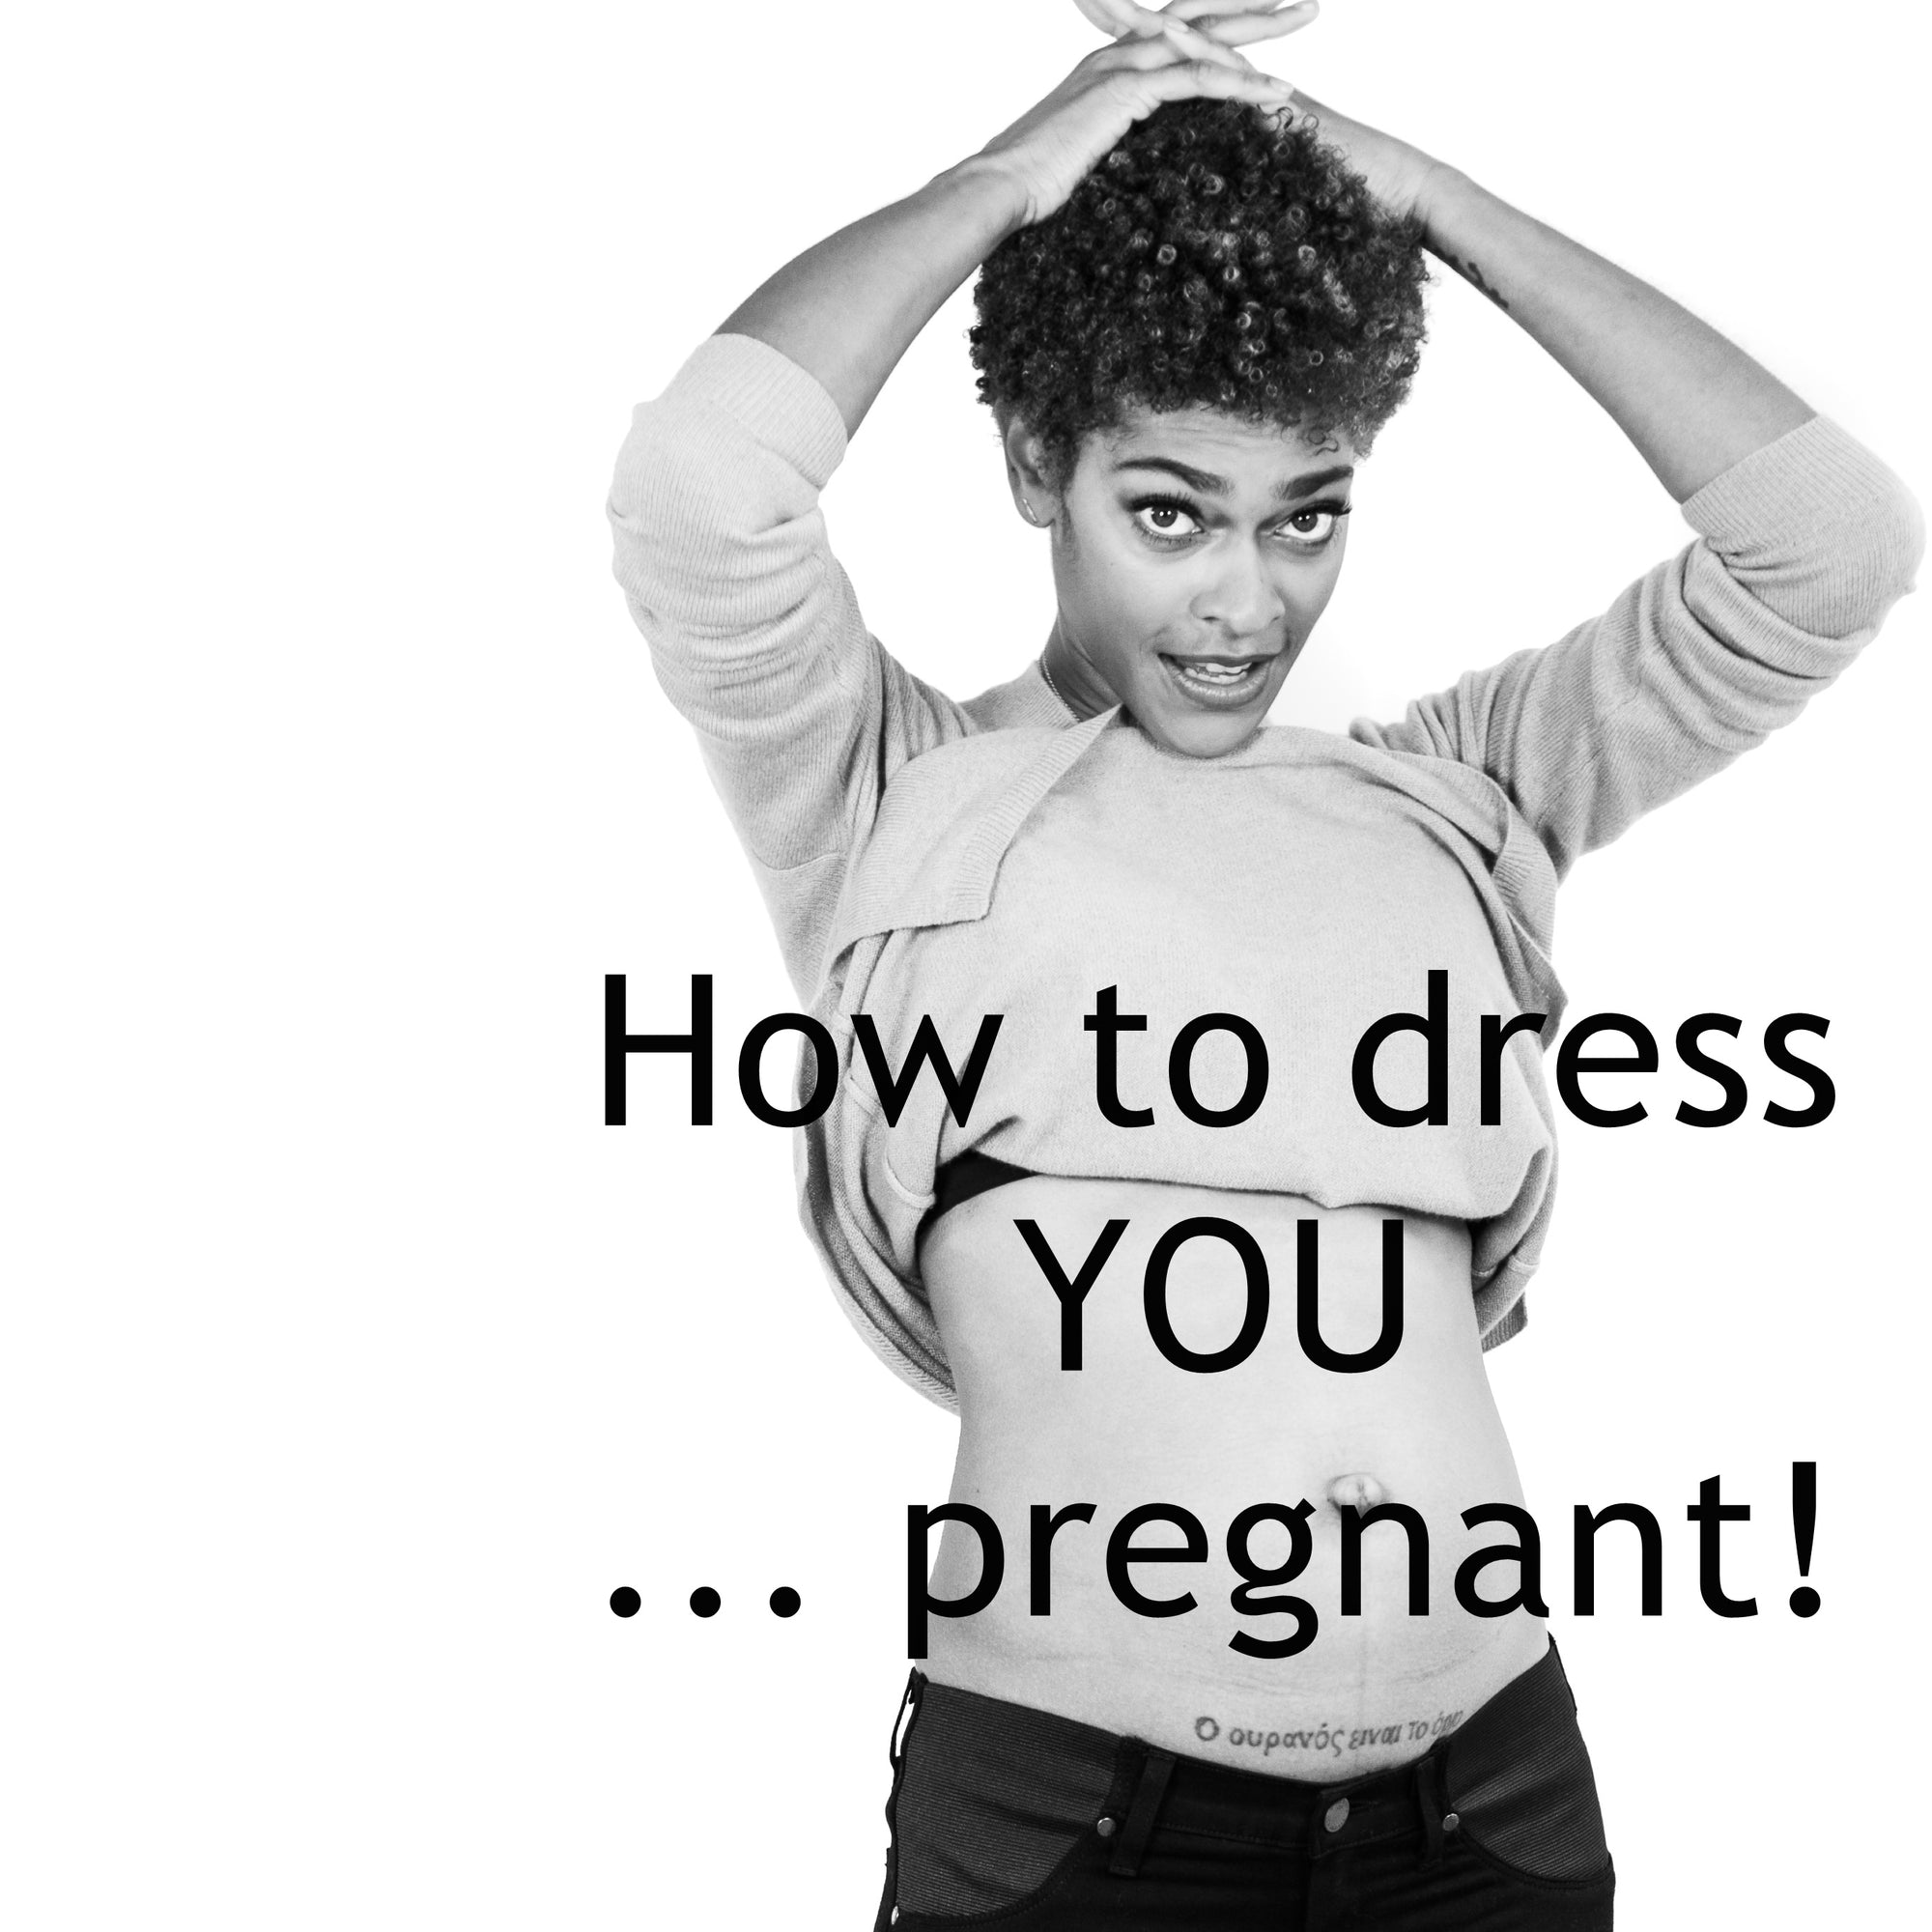 How to dress YOU -with a baby bump